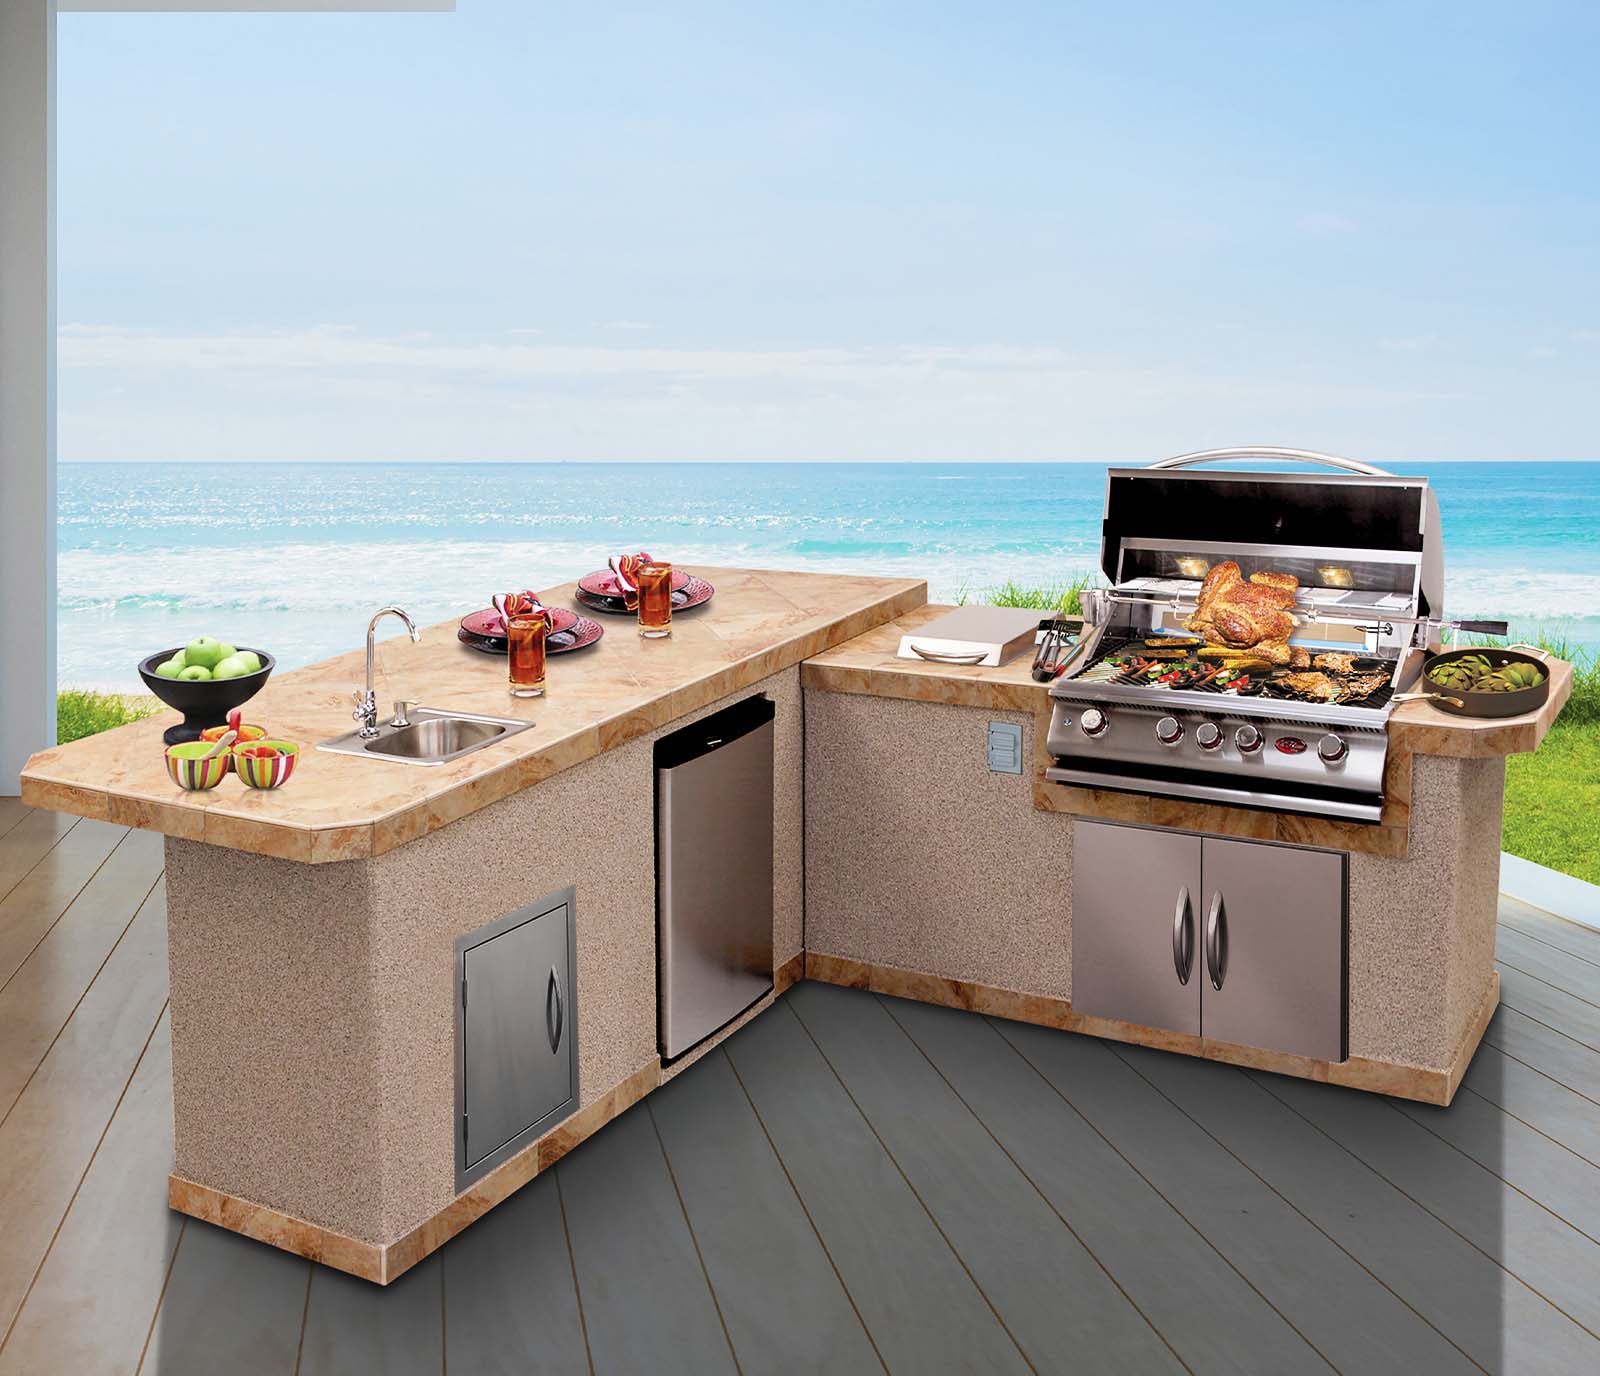 FREE SHIPPING Outdoor Kitchens, Mobile Grill Islands, Dual Grill Tables,  Grill Cabinets All Customized for Your Outdoor Living Space 